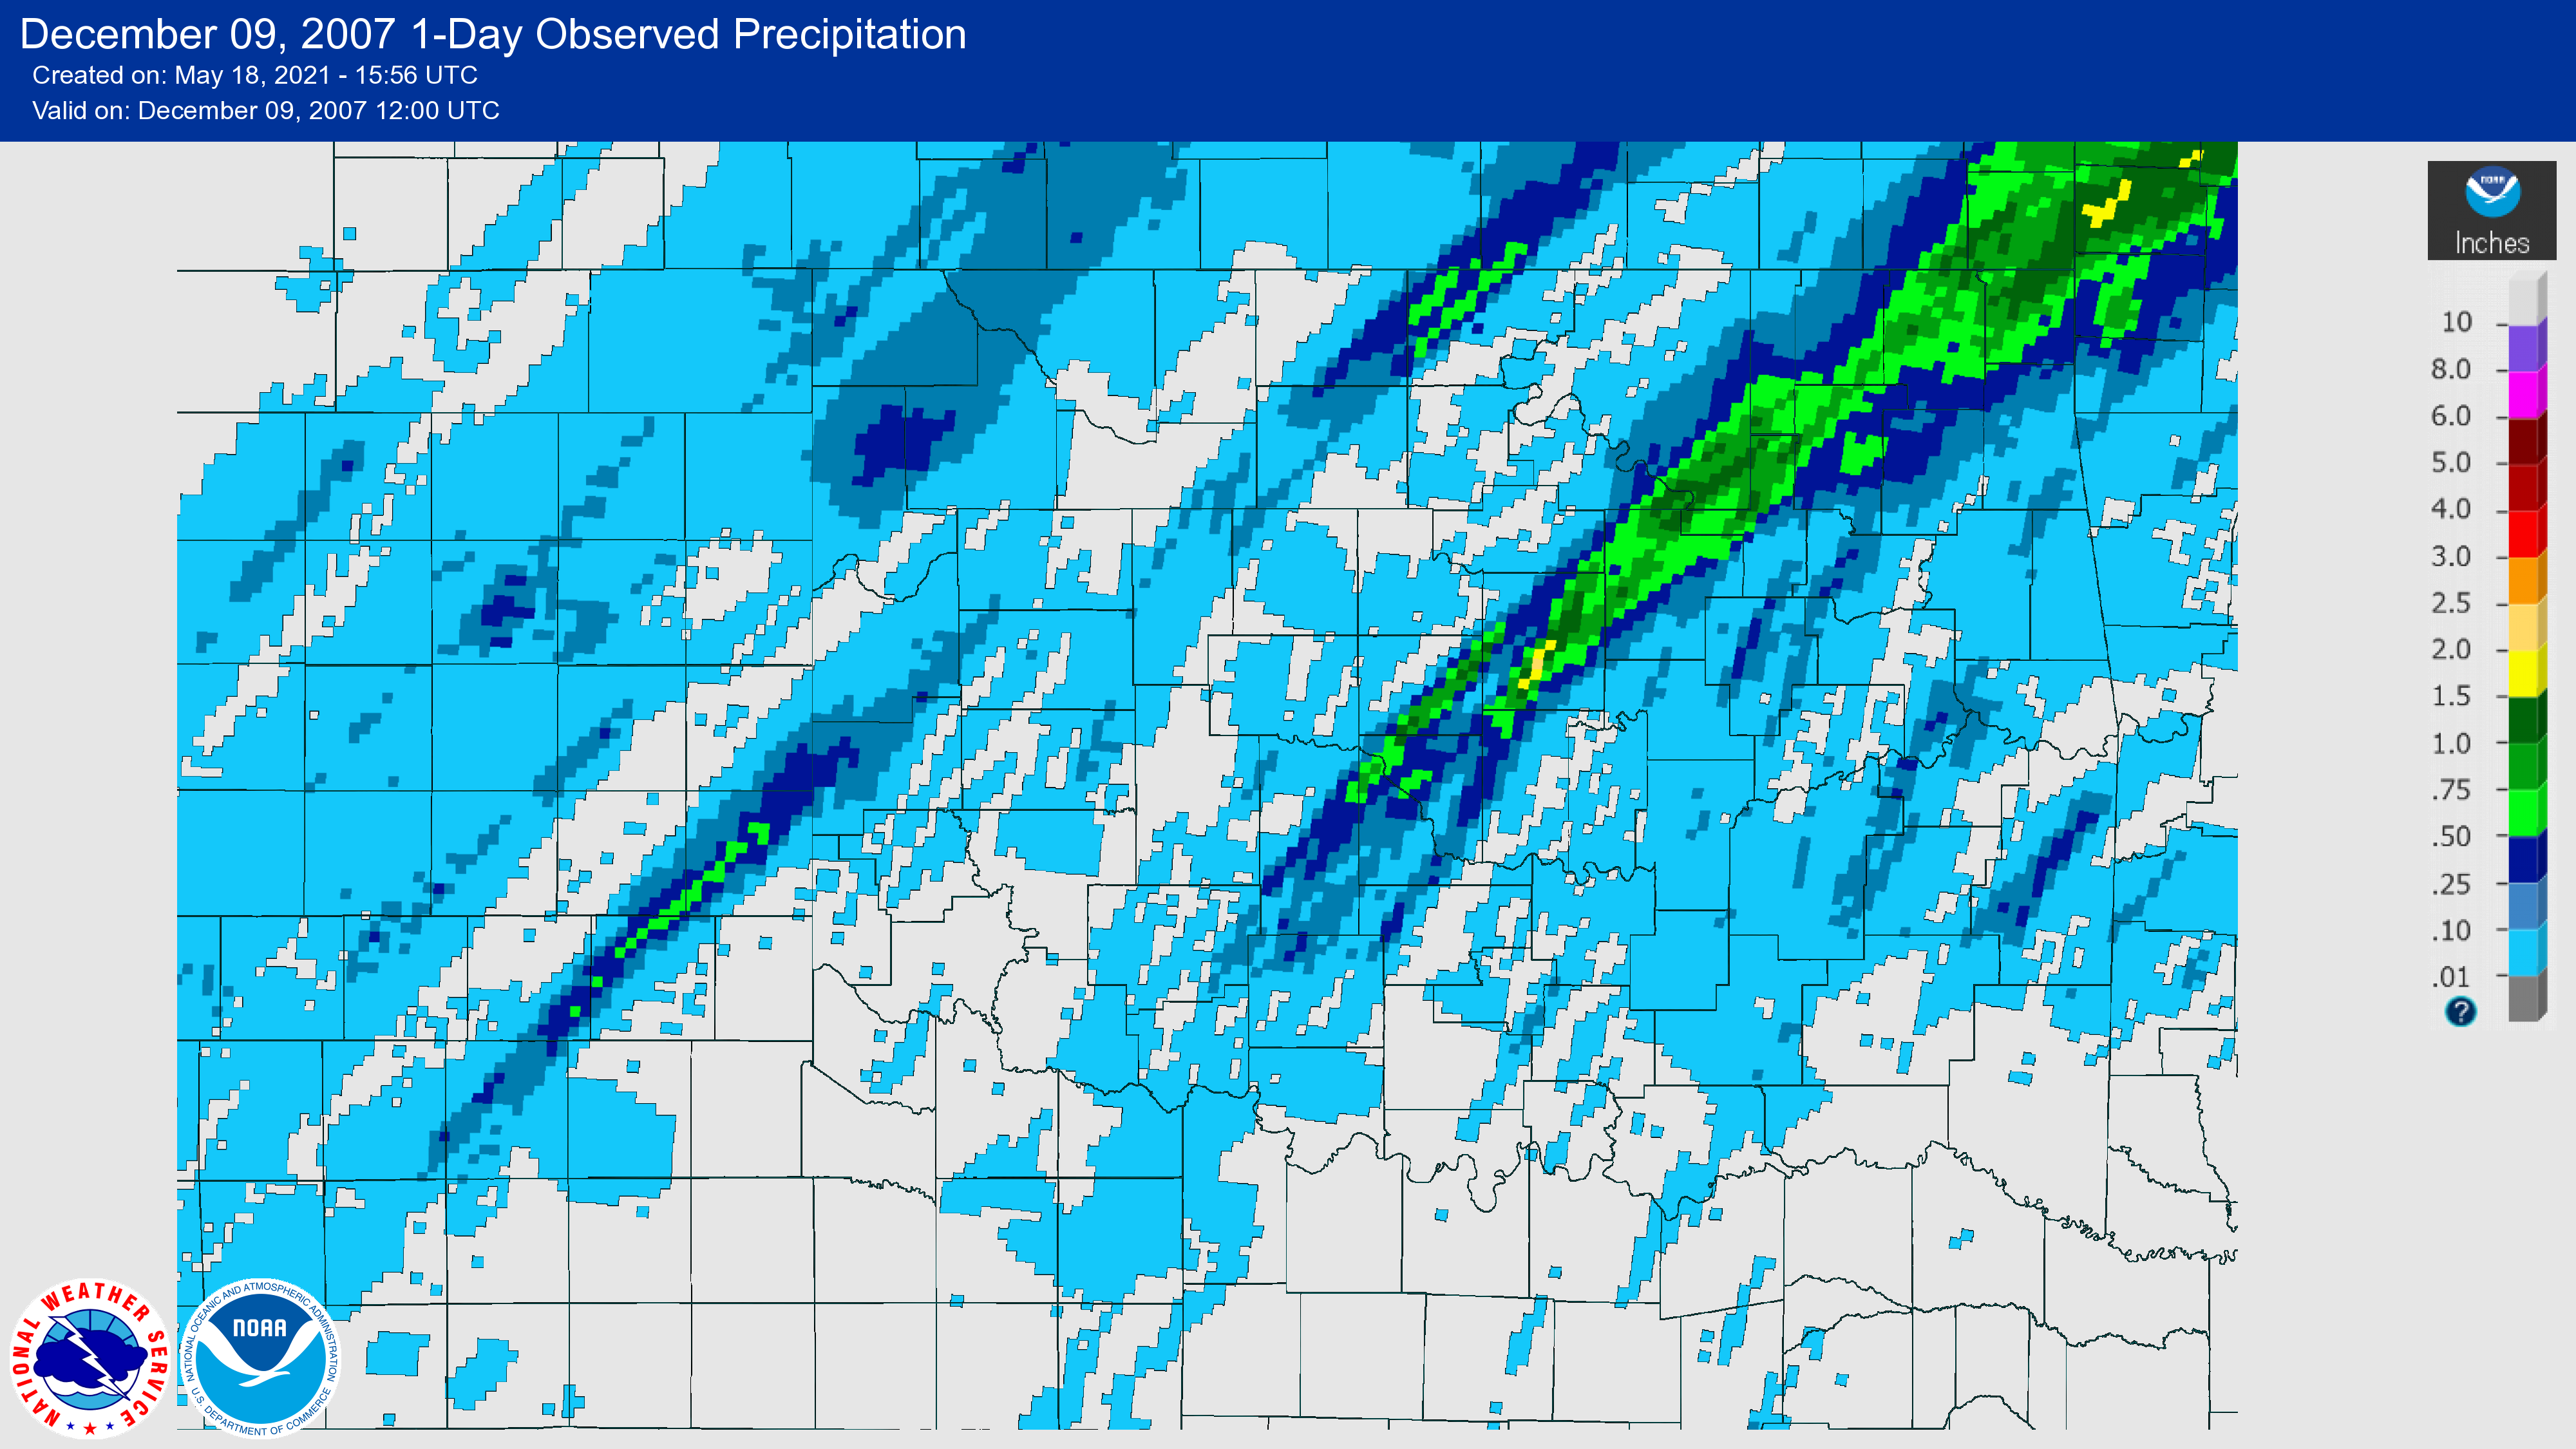 24-hour Precipitation Total ending at 6:00 AM CST on December 9, 2007 for the NWS Norman, Oklahoma Forecast Area